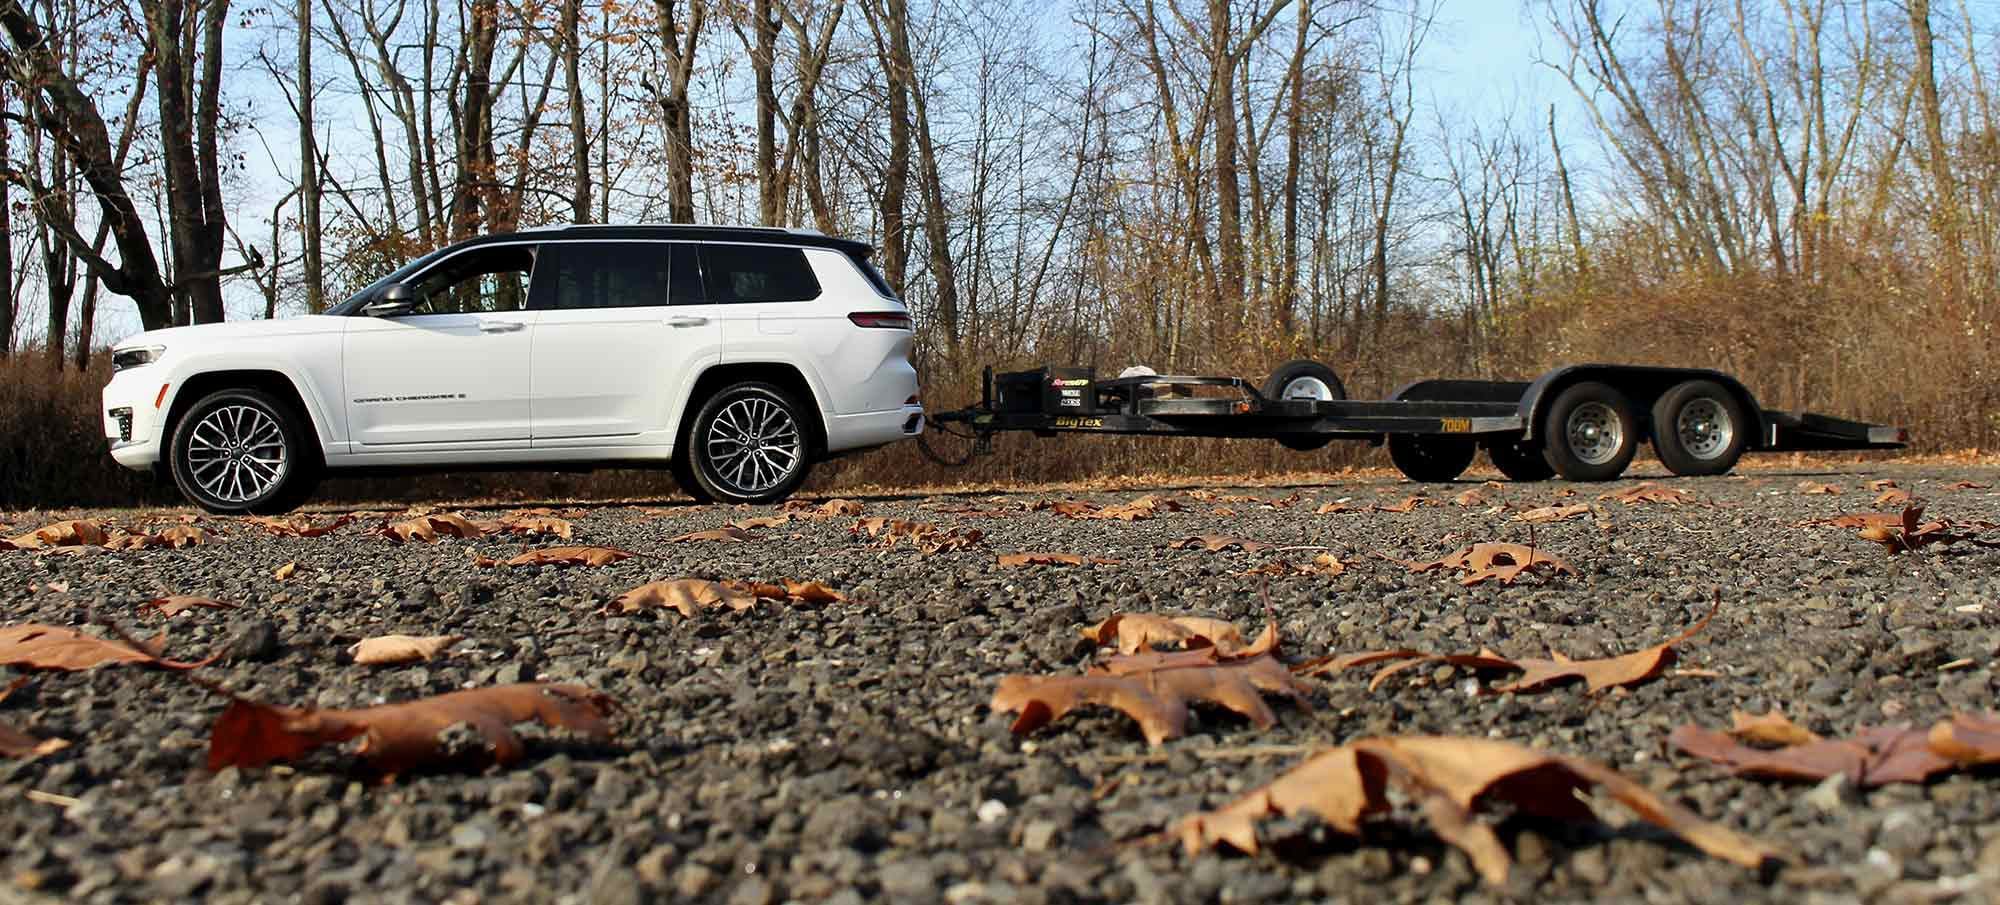 For a comfortable daily driver that can tow a reasonable amount, the Grand Cherokee L is a solid choice.